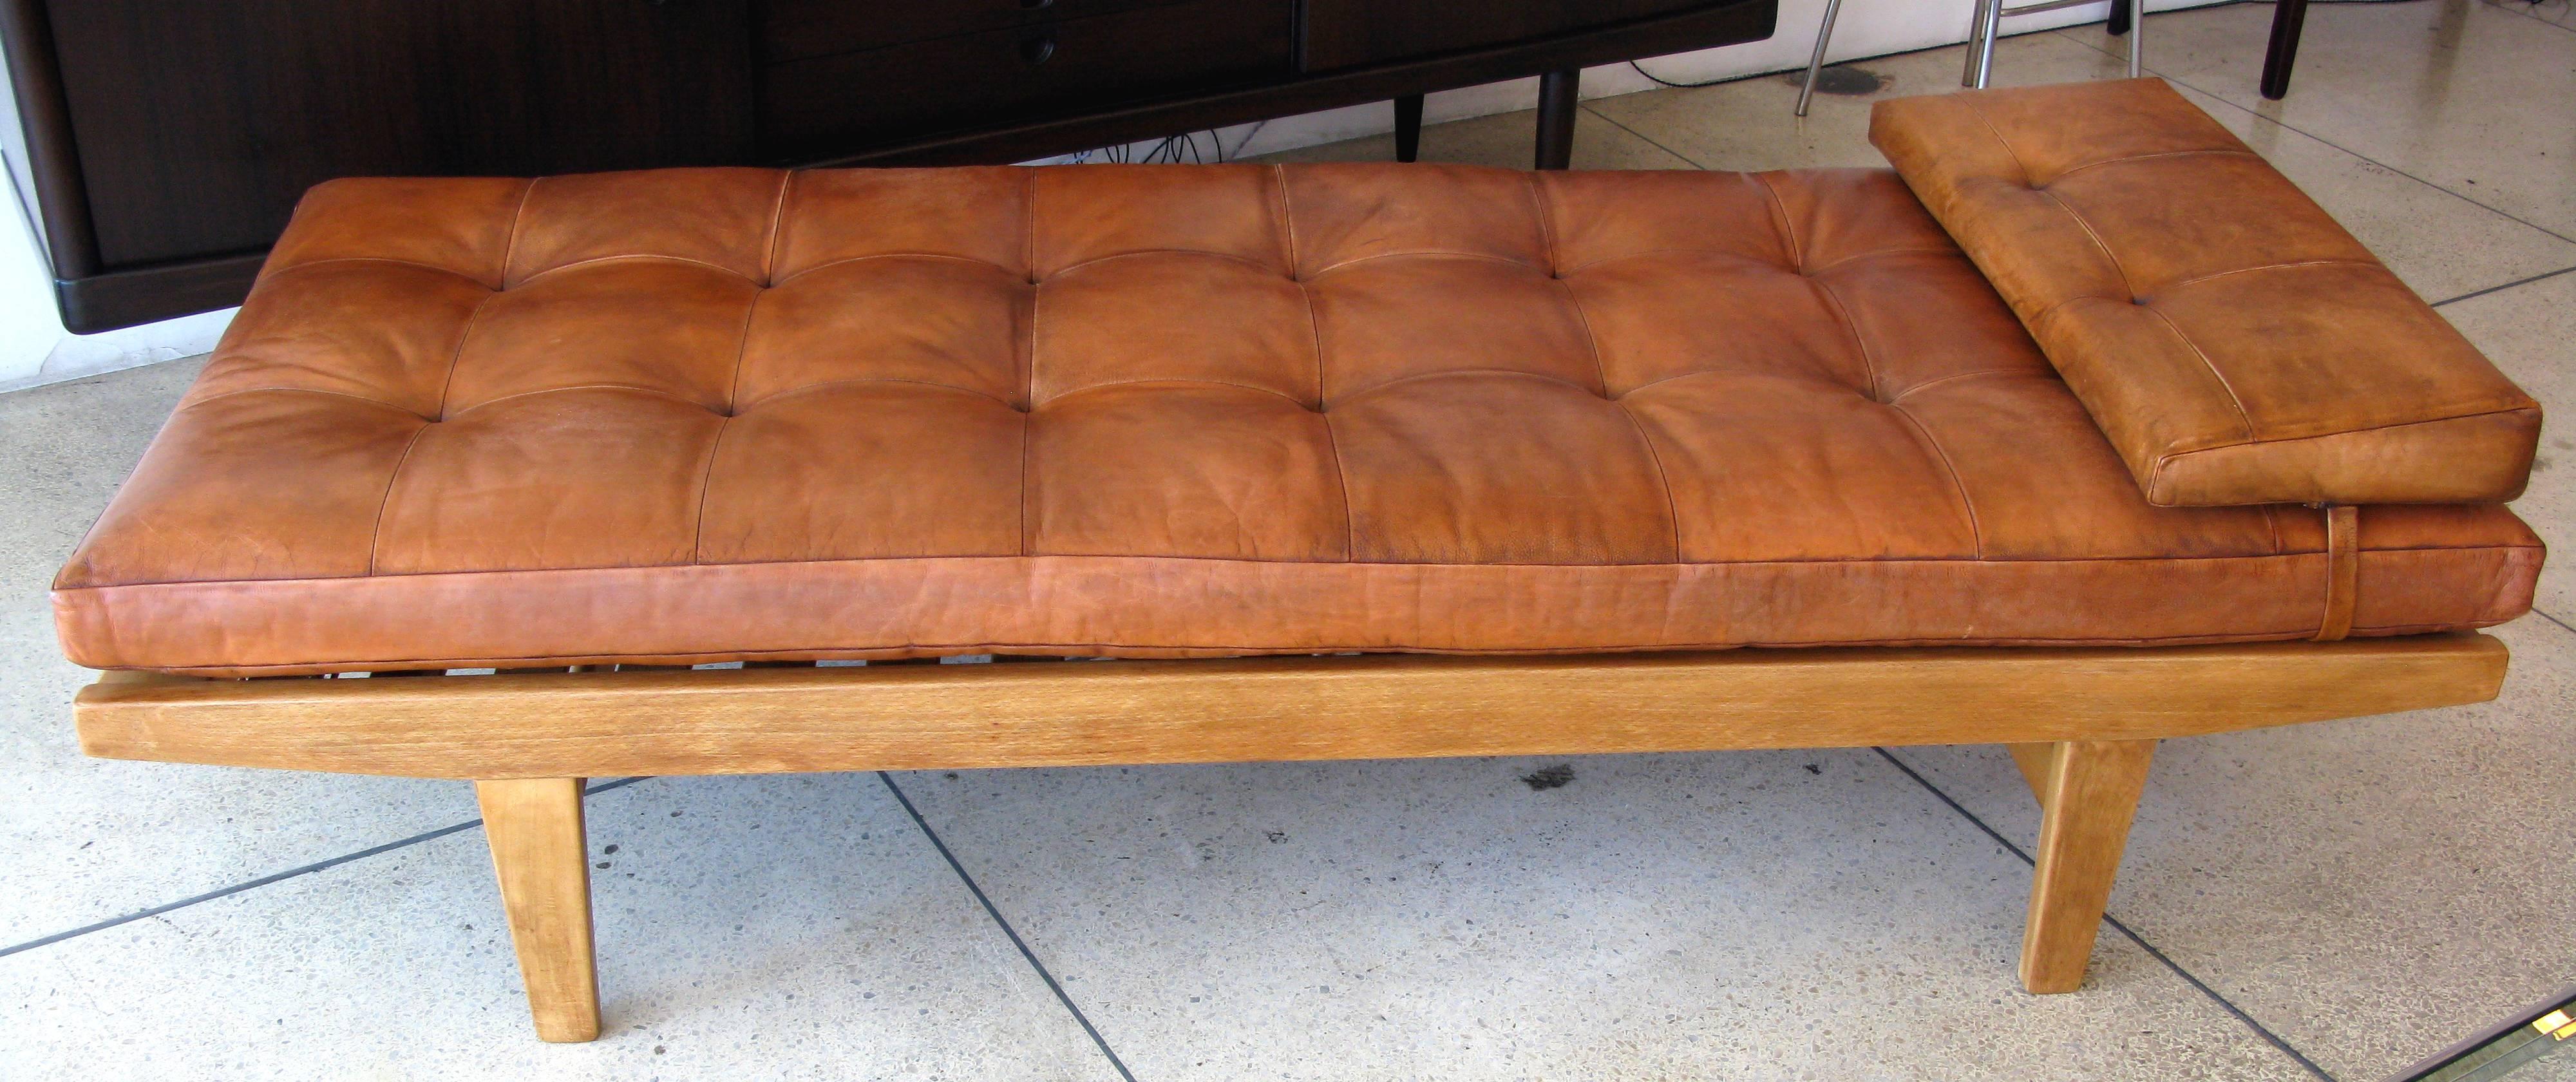 Leather and teak daybed by Poul Volther.  Beautifully aged tufted cognac leather cushion with matching leather wedge pillow.

* ON SALE - 25% OFF.  Originally $7200.  LIMITED TIME ONLY.  No further discounts.